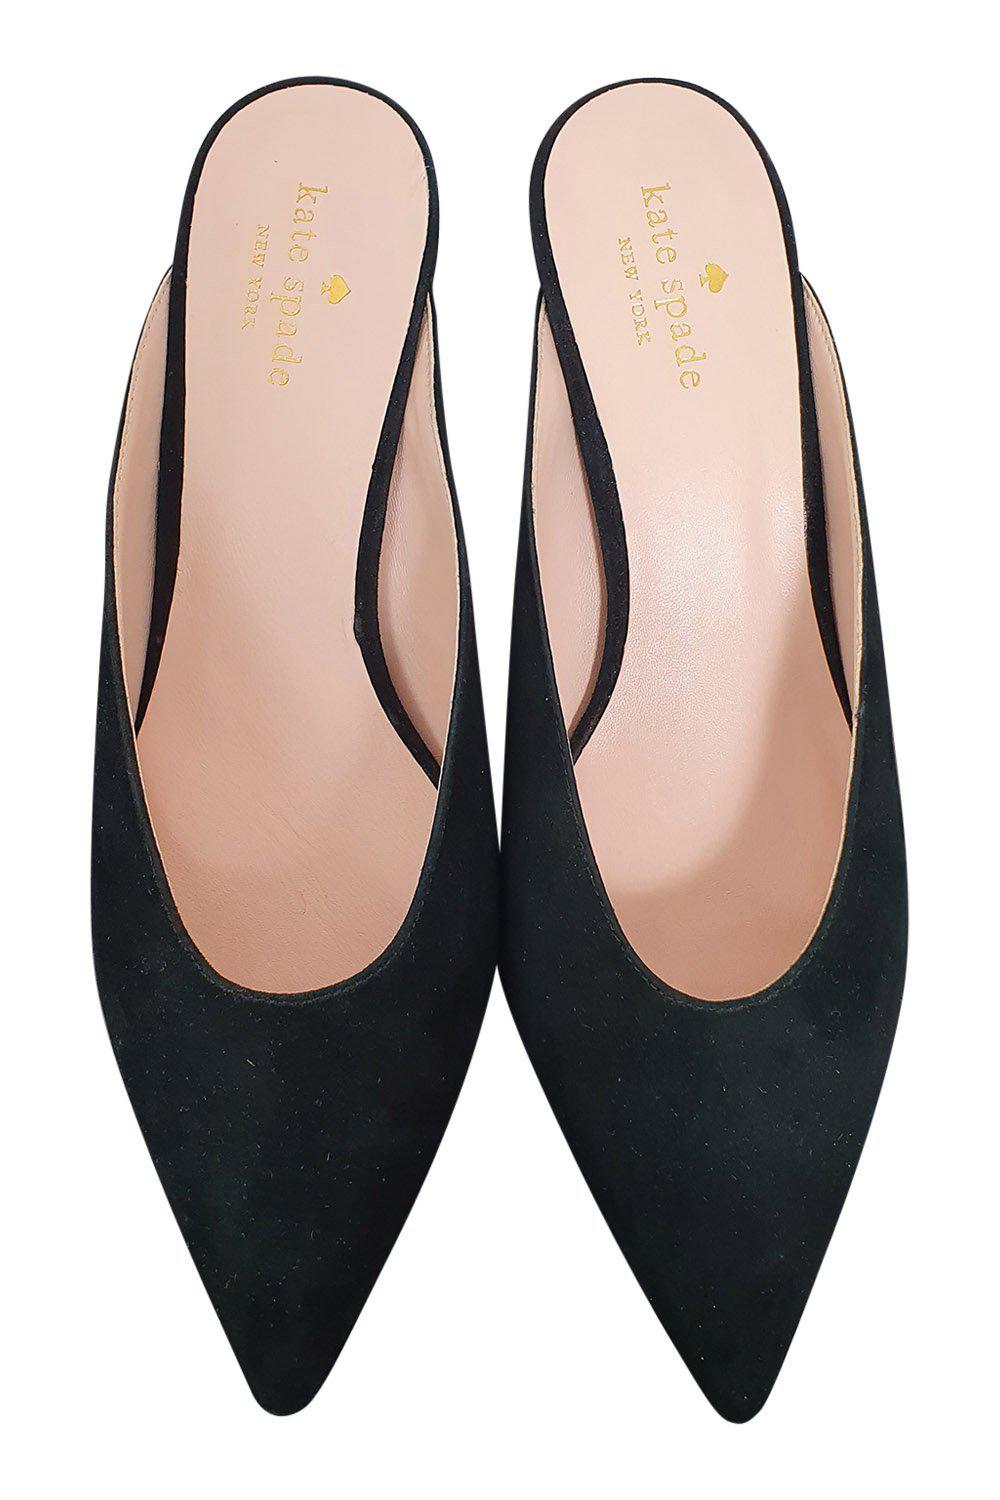 KATE SPADE New York Black Suede Sherrie Pointed Toe Court Heels (EU 38.5 | US 8.5 | UK 5.5)-The Freperie